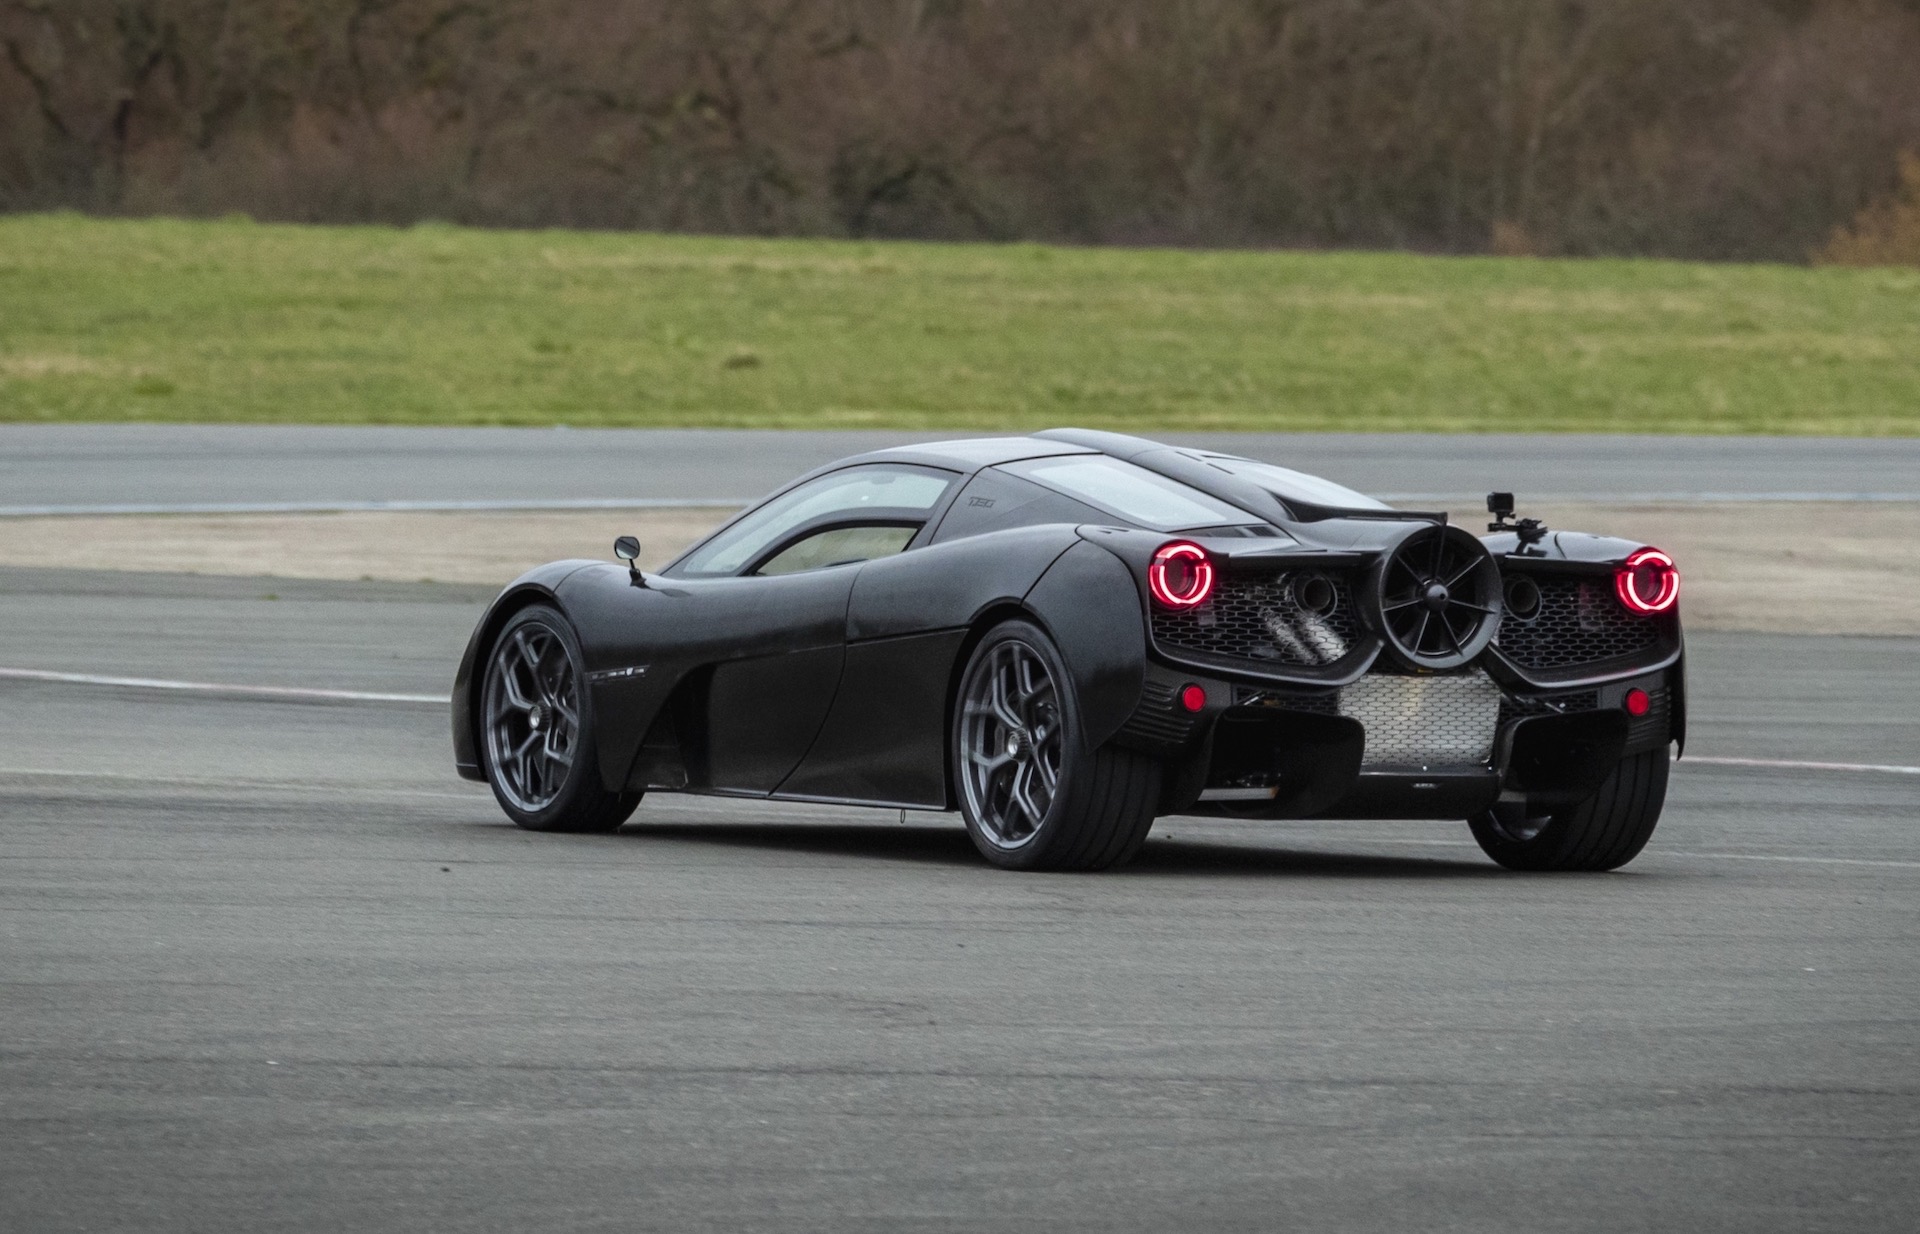 Gordon Murray T.50 hits the track for first tests (video)